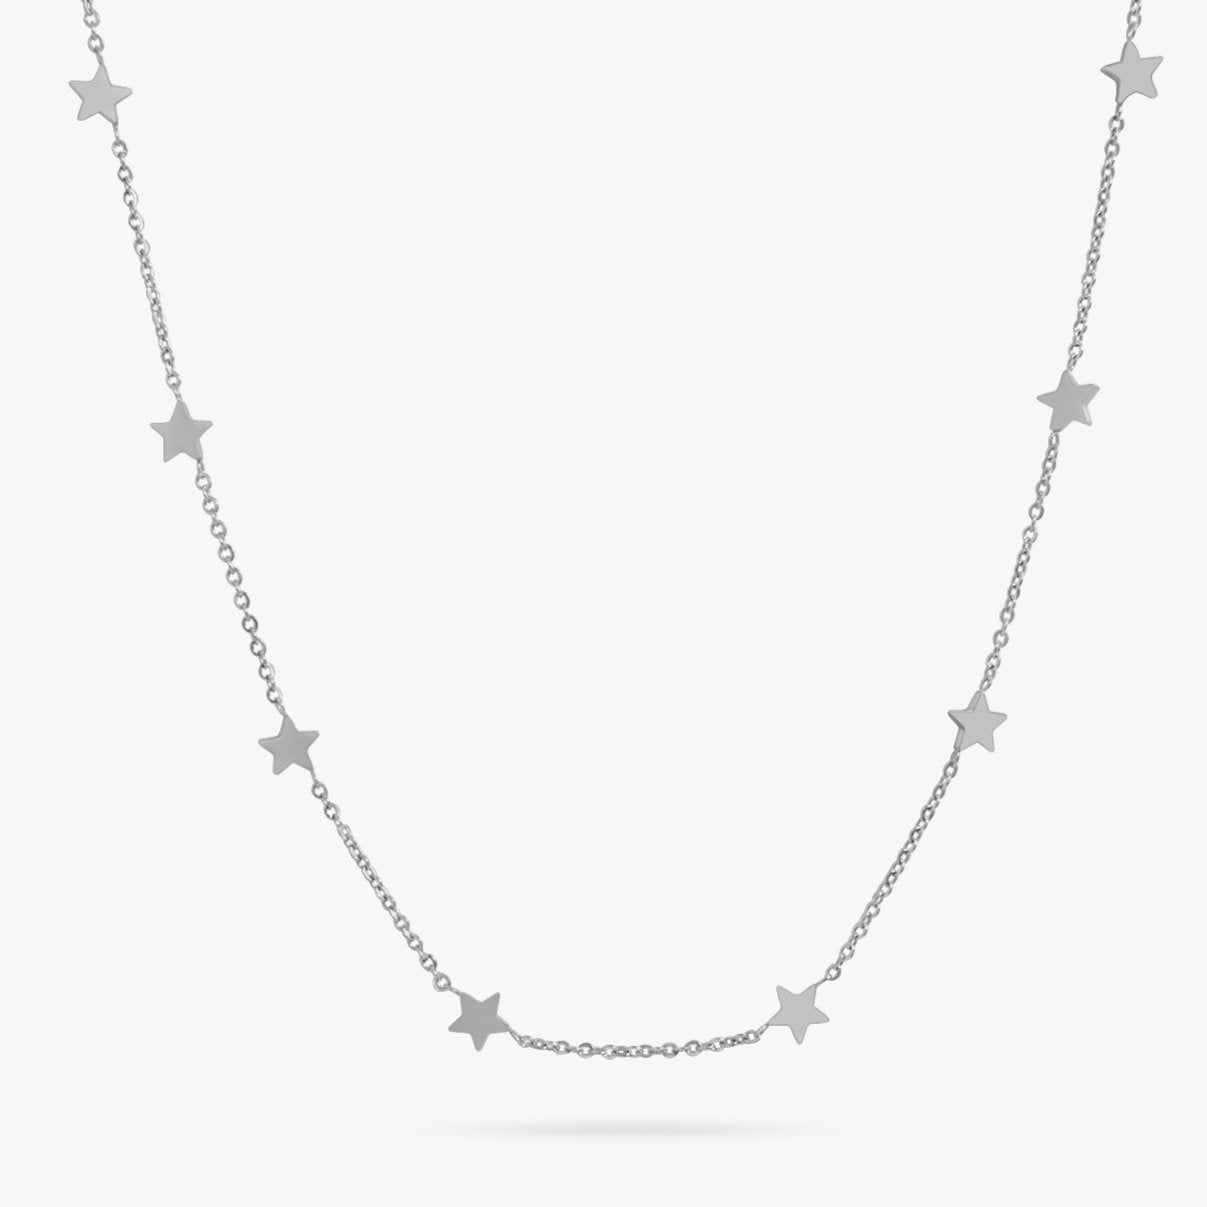 Starstruck 2.0 Necklace in Silver - Flaire & Co.